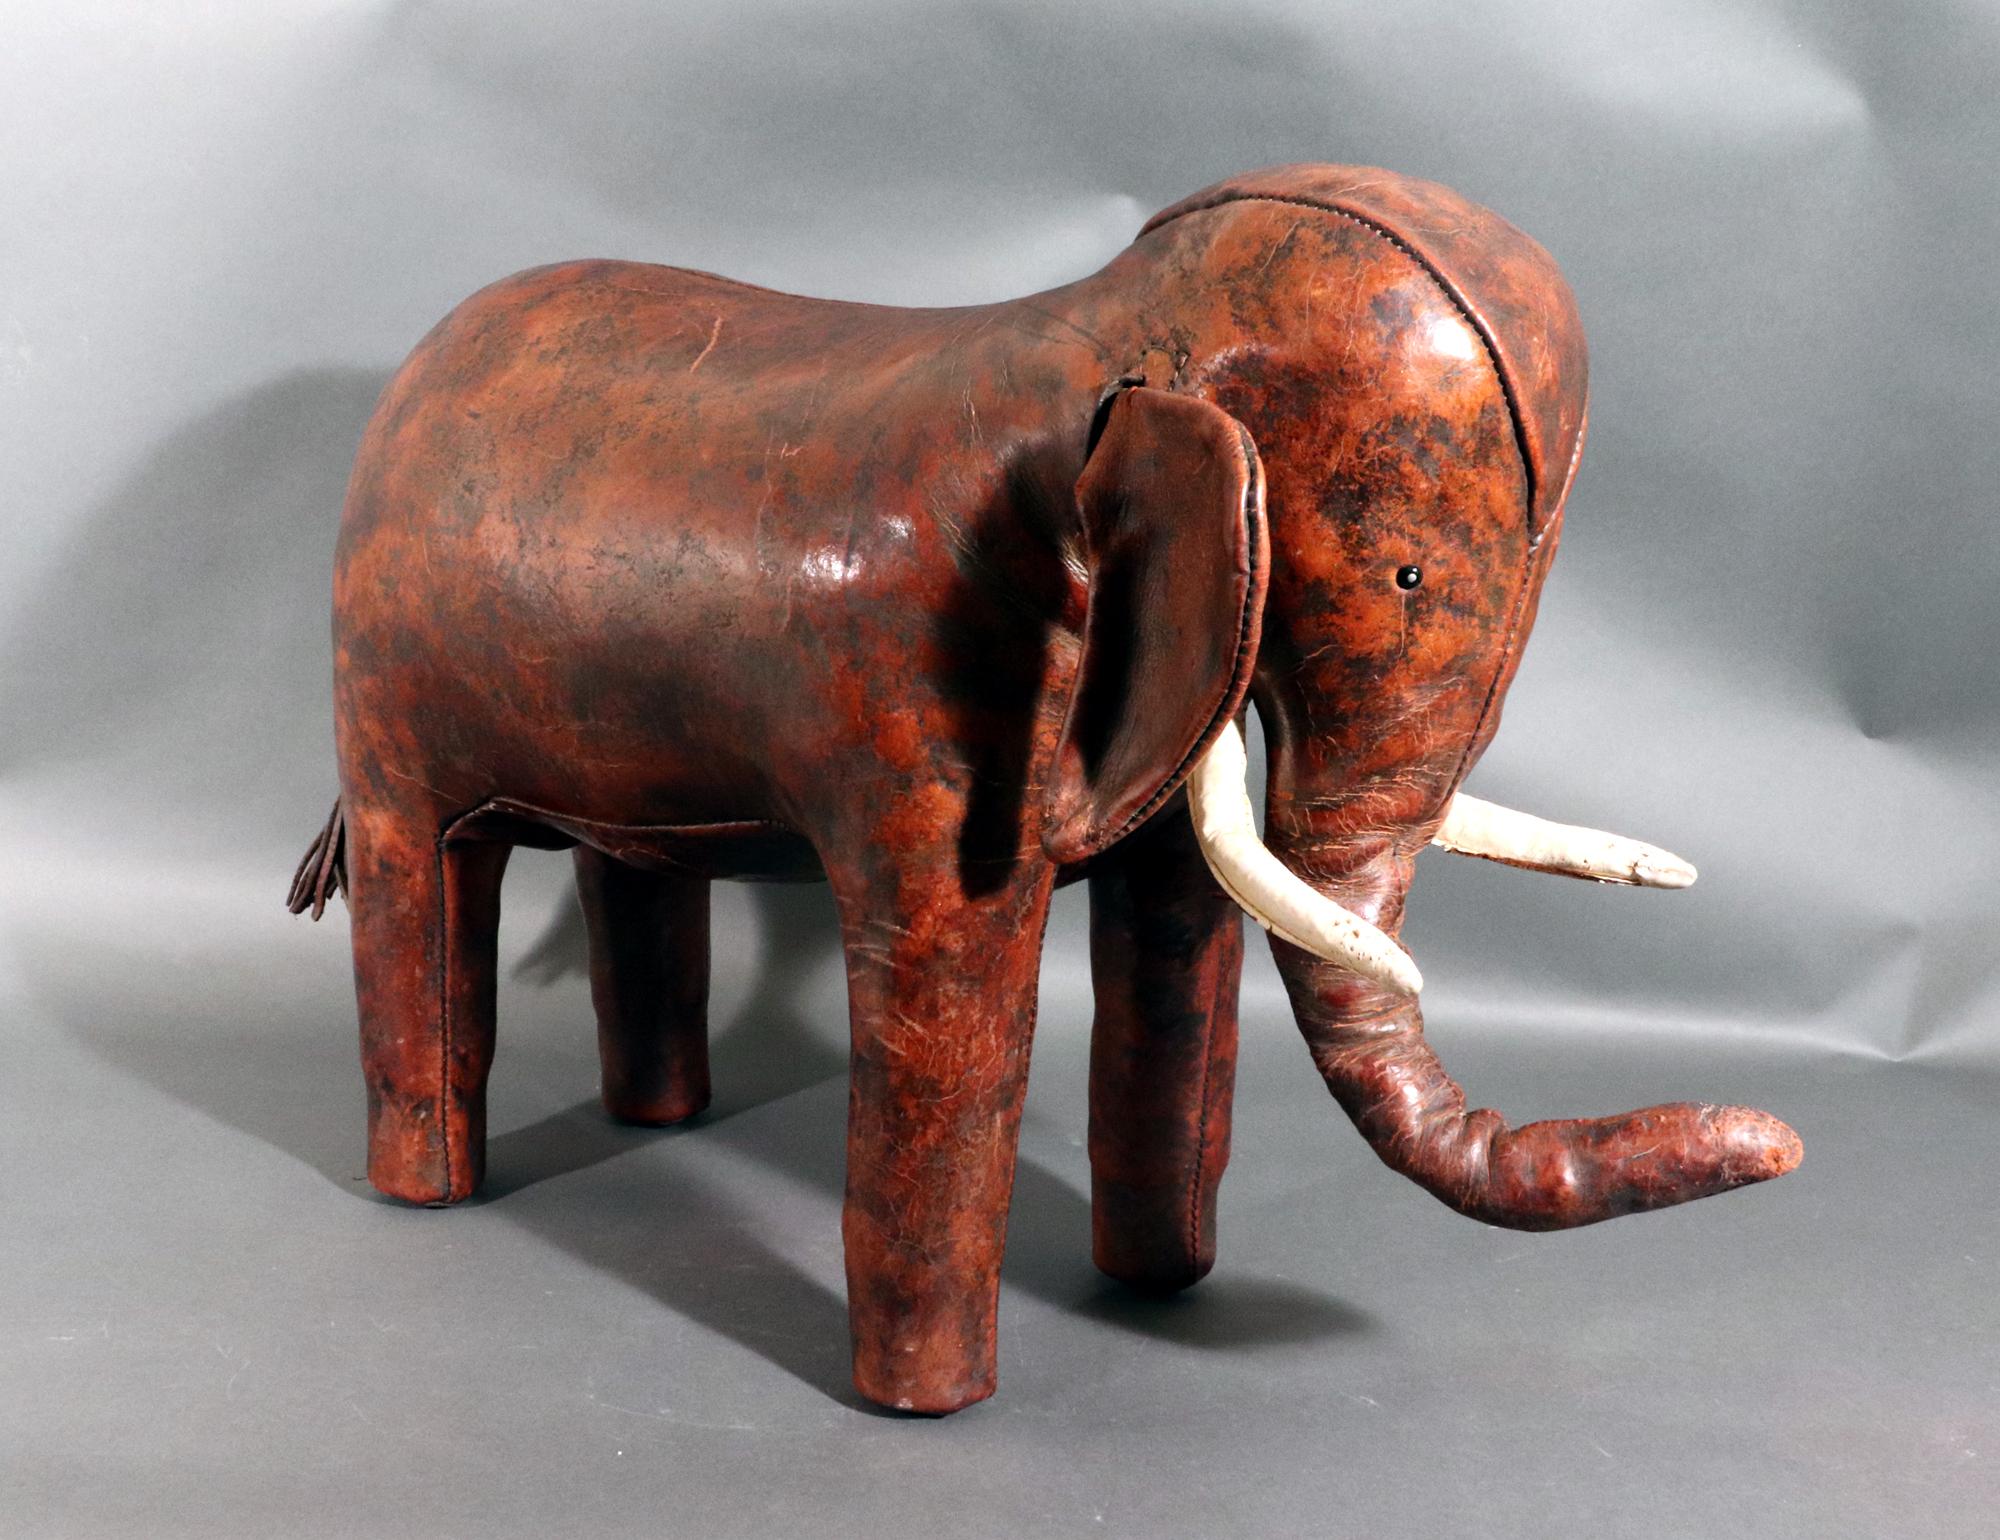 Vintage Leather Elephant Stool or Ottoman,
Dmitri Omersa,
1960s

The leather footstool is designed in the shape of an elephant in a beautiful leather.  The tusks are white leather and the body a brown.  The condition is excellent with typical patina